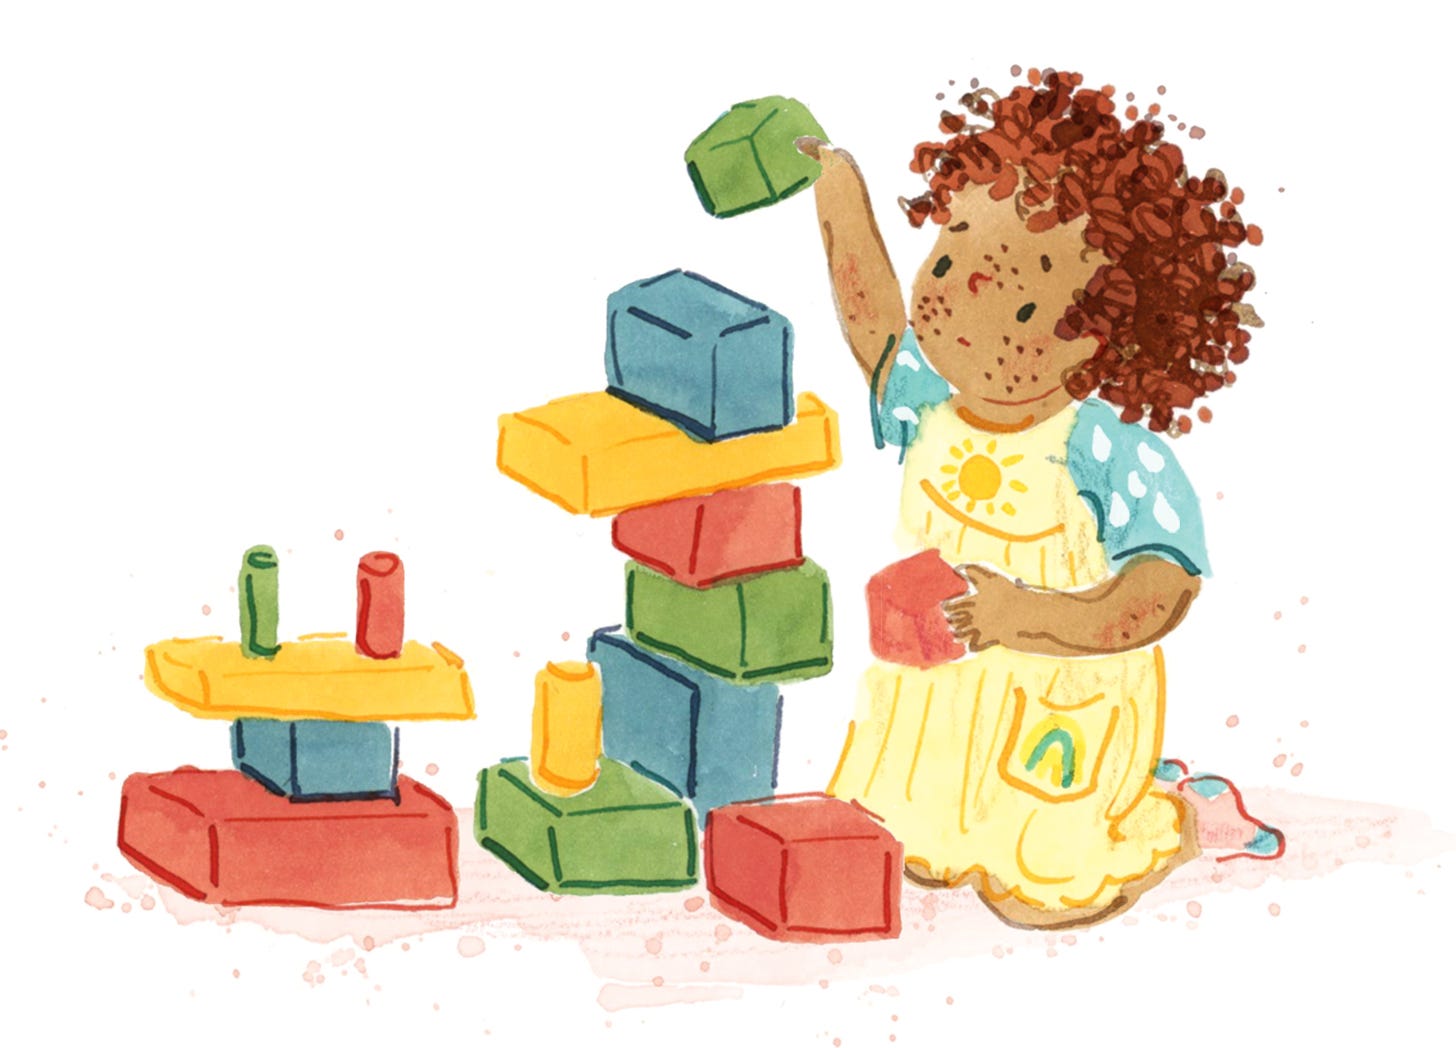 Toddler building a tower from colourful blocks. Illustration by Nanette Regan from It's Your Time to Shine by Dianne White